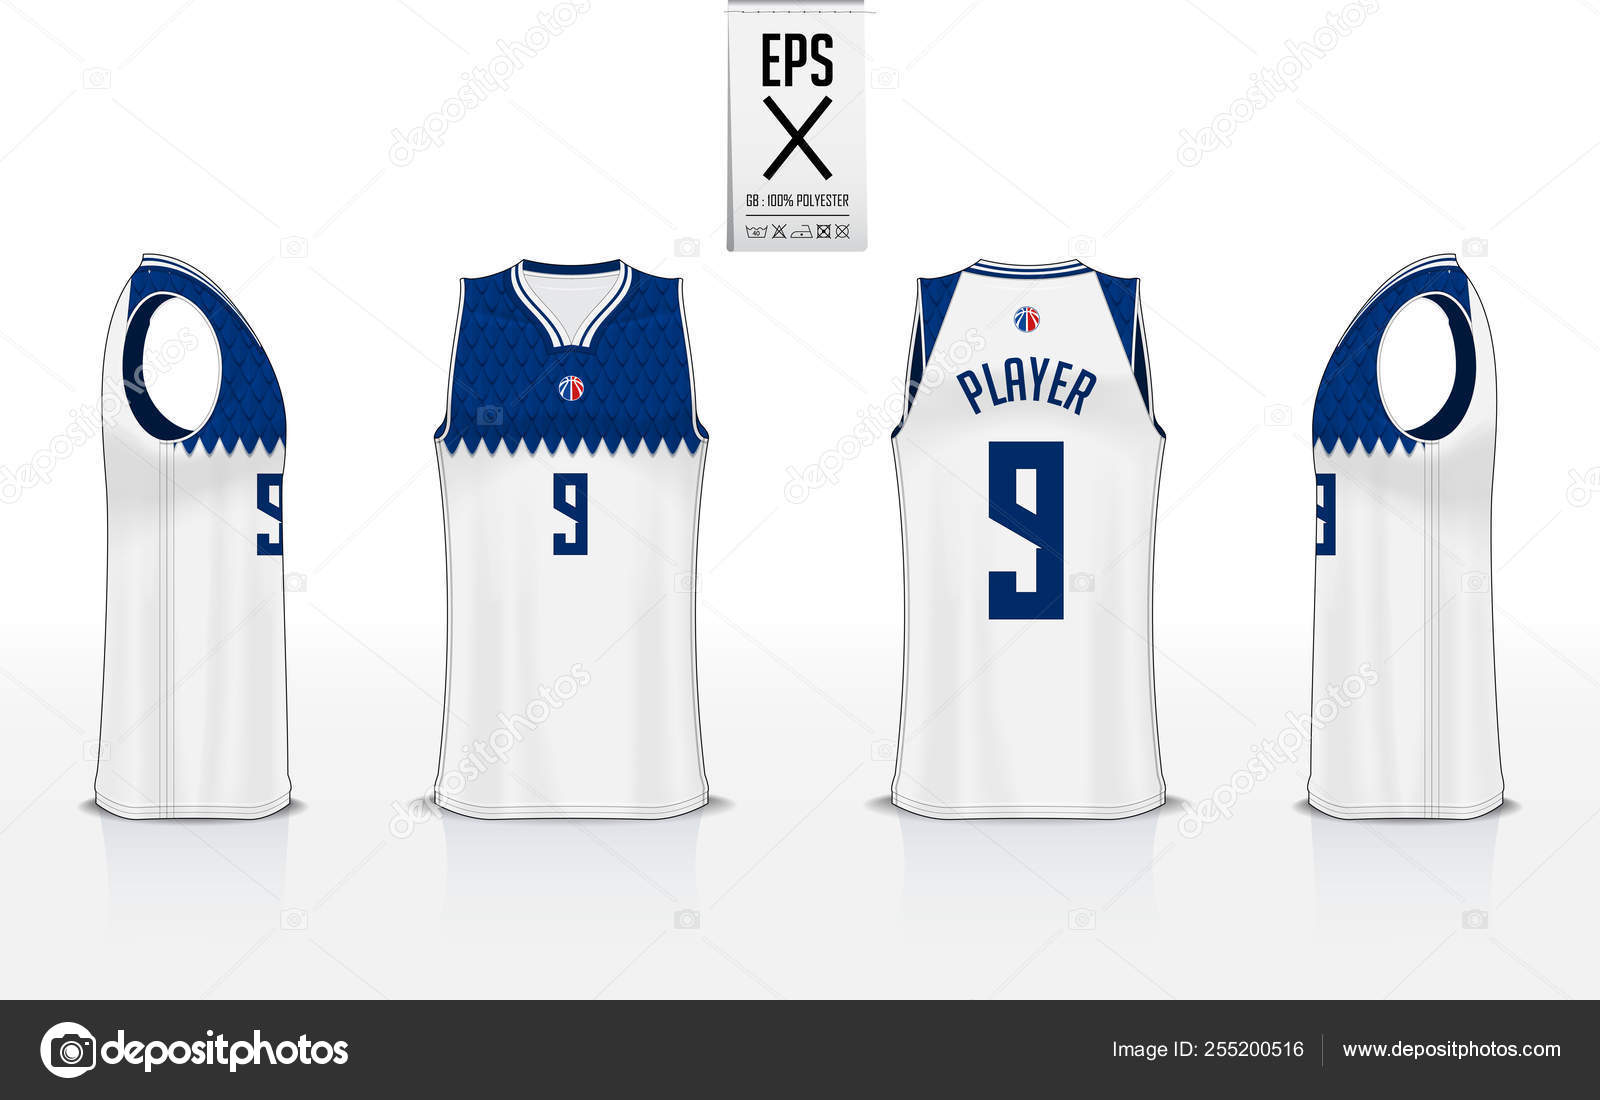 Basketball uniform mockup template design for basketball club. Basketball  jersey, basketball shorts in front and back view. Basketball logo design.  Stock Vector